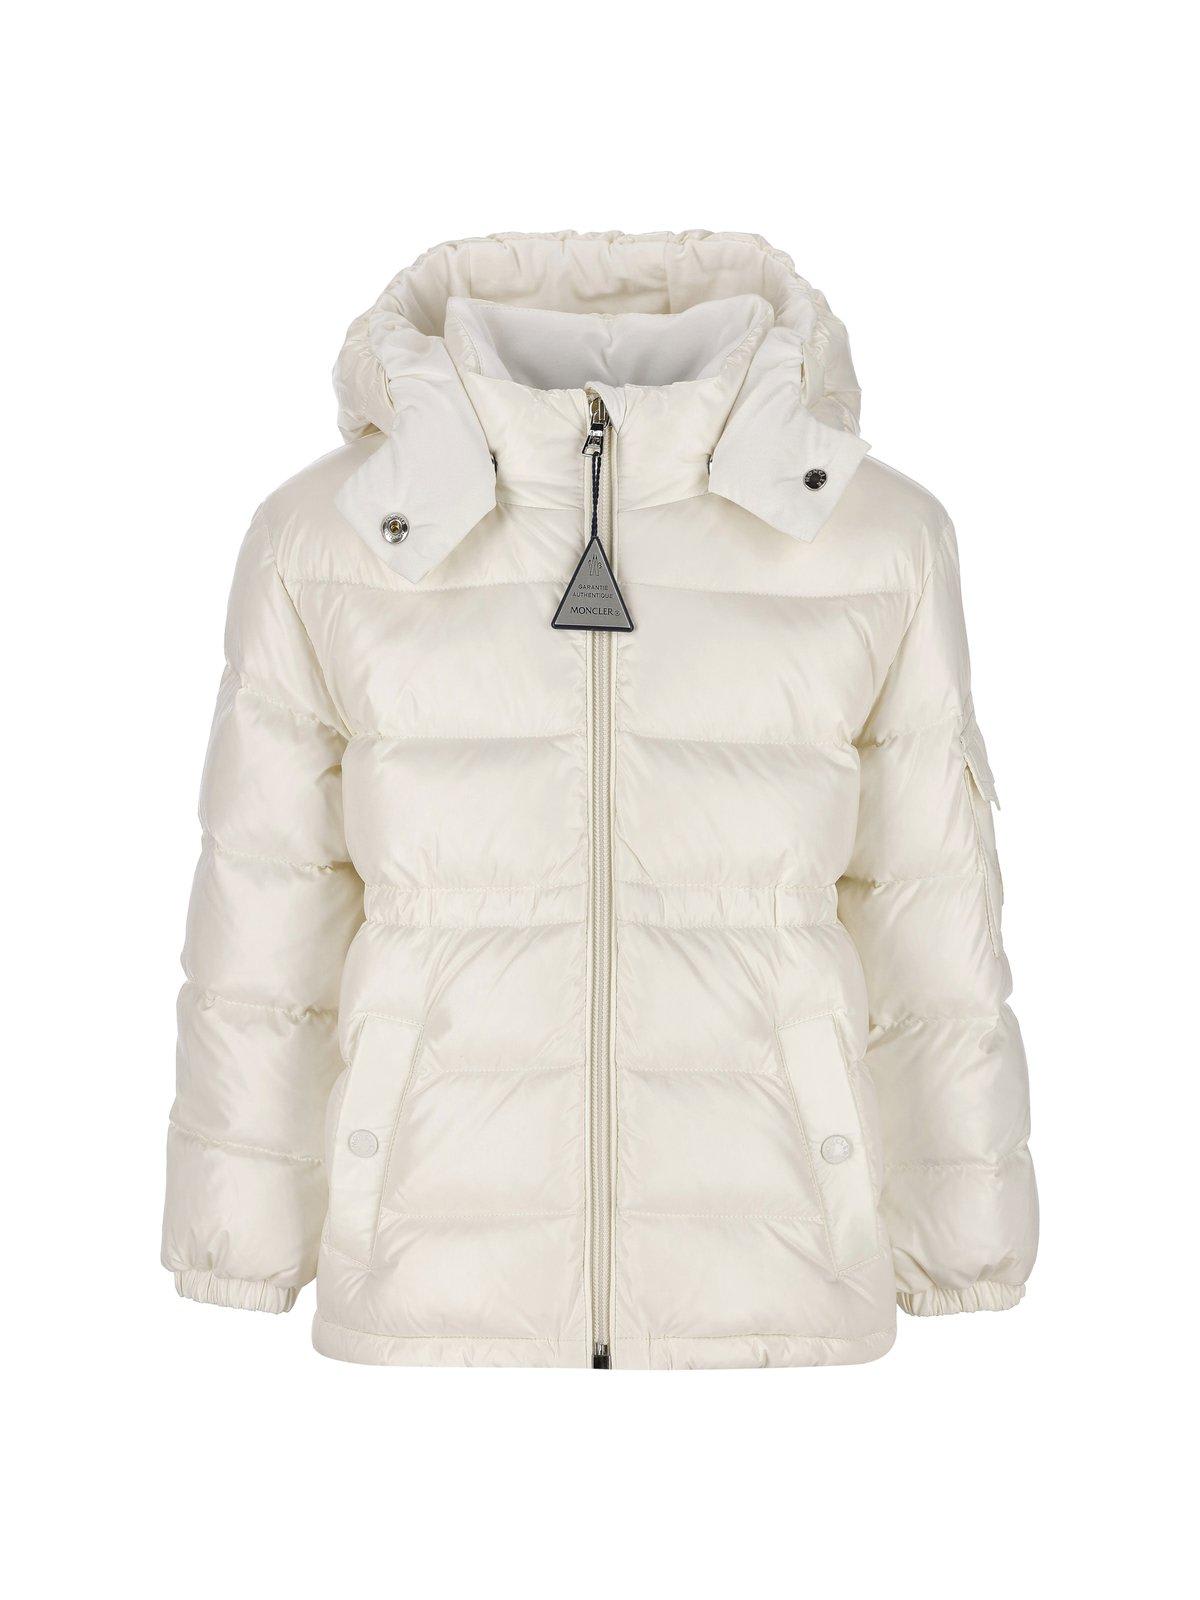 Moncler Babies' Ebre Zip-up Hooded Jacket In White